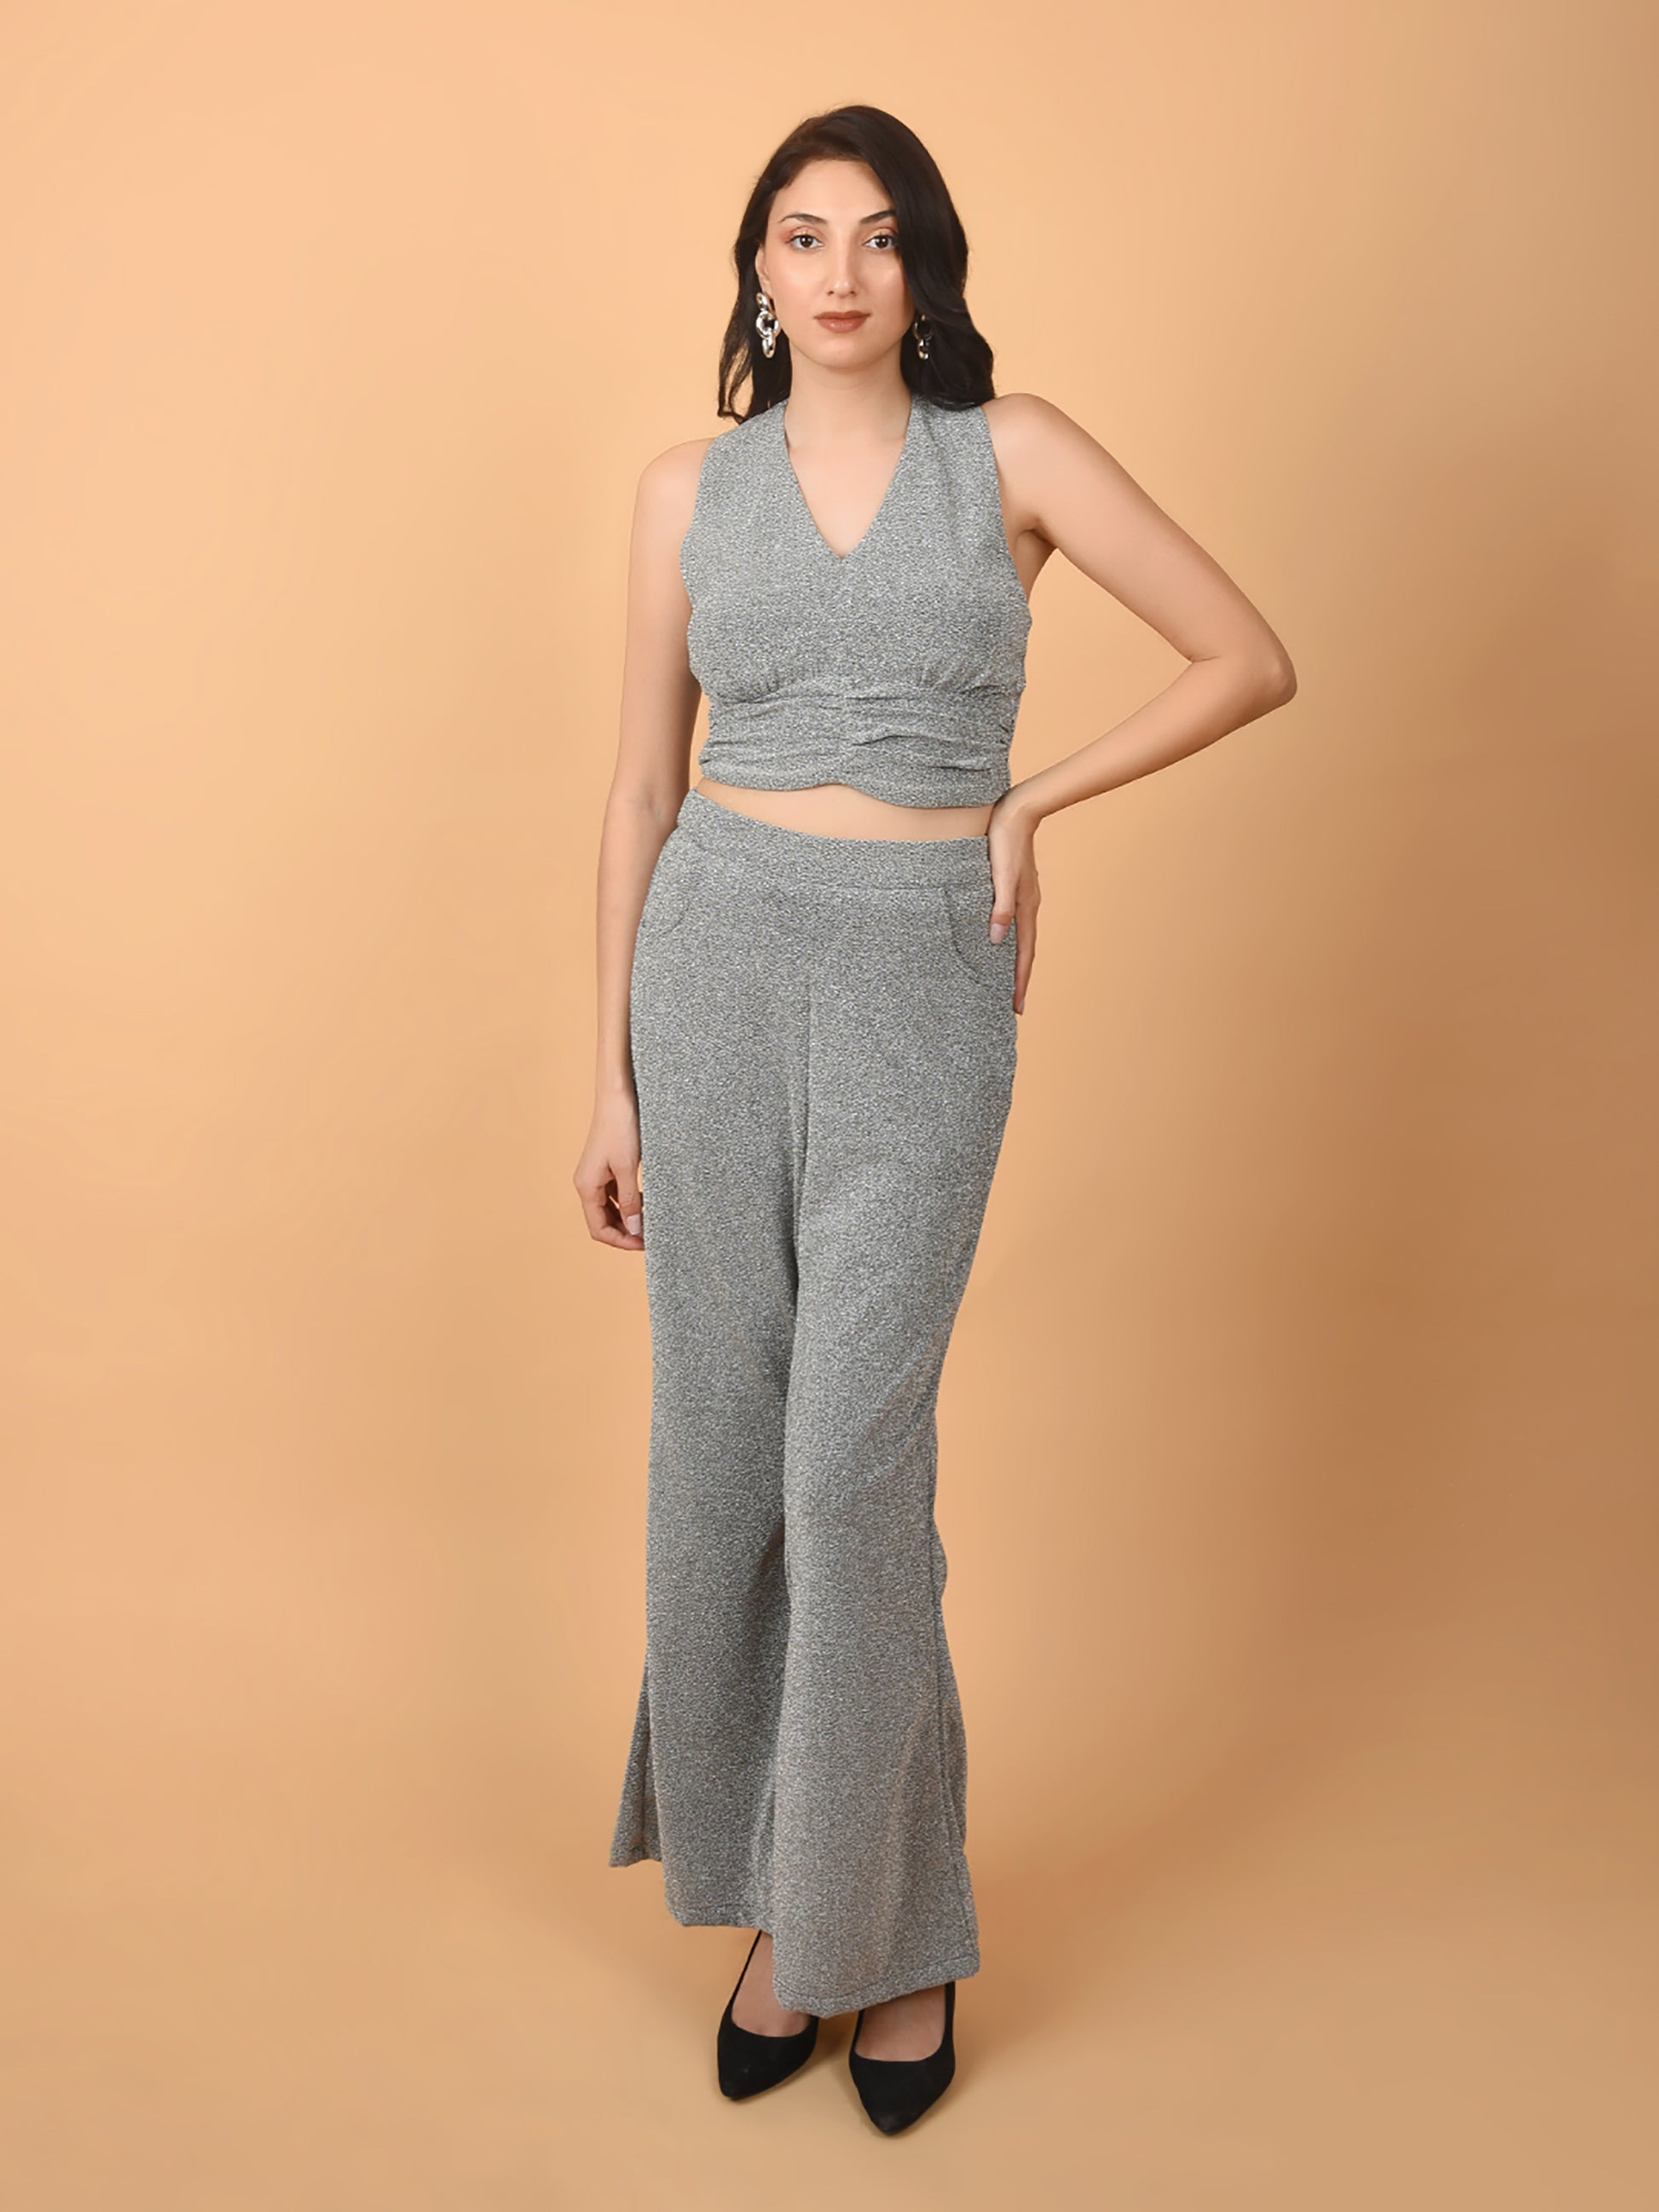 Flawless Women Stylish Silver Co-ord Set | DISC Being Flawless